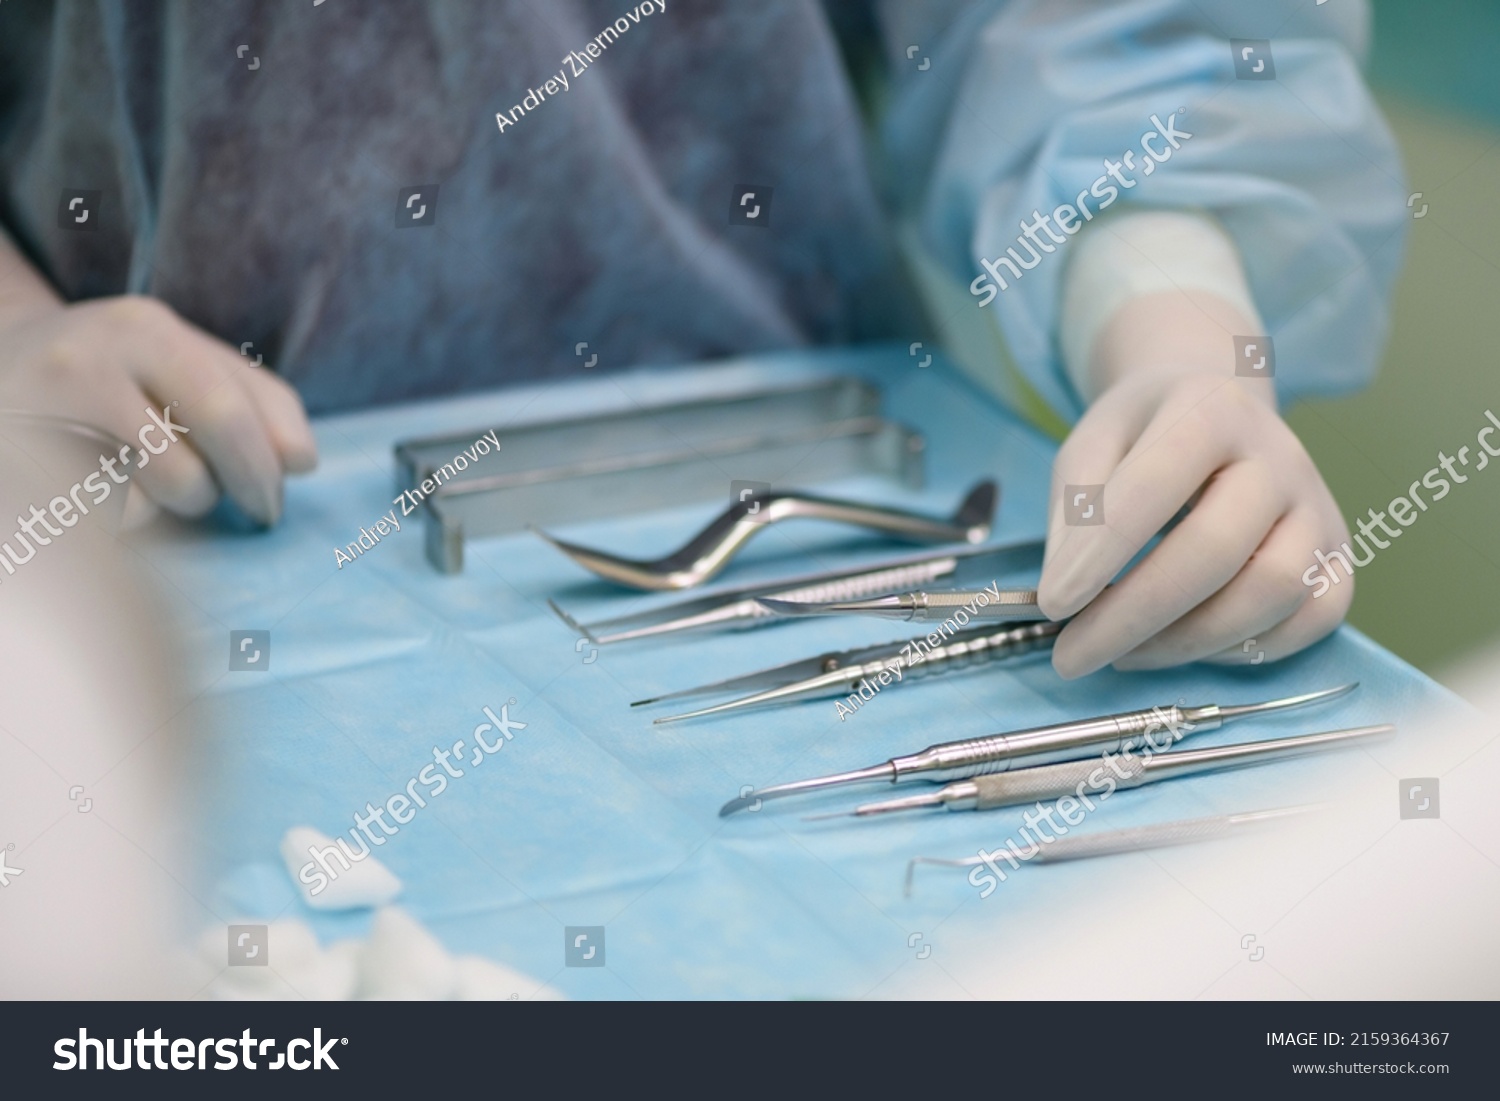 Surgical instruments in the operating room. A nurse in a surgical suit and gloves is preparing for a tooth implant operation.
Dental probe, tweezers, scalpel, needle holder, rasps on instrument table. #2159364367